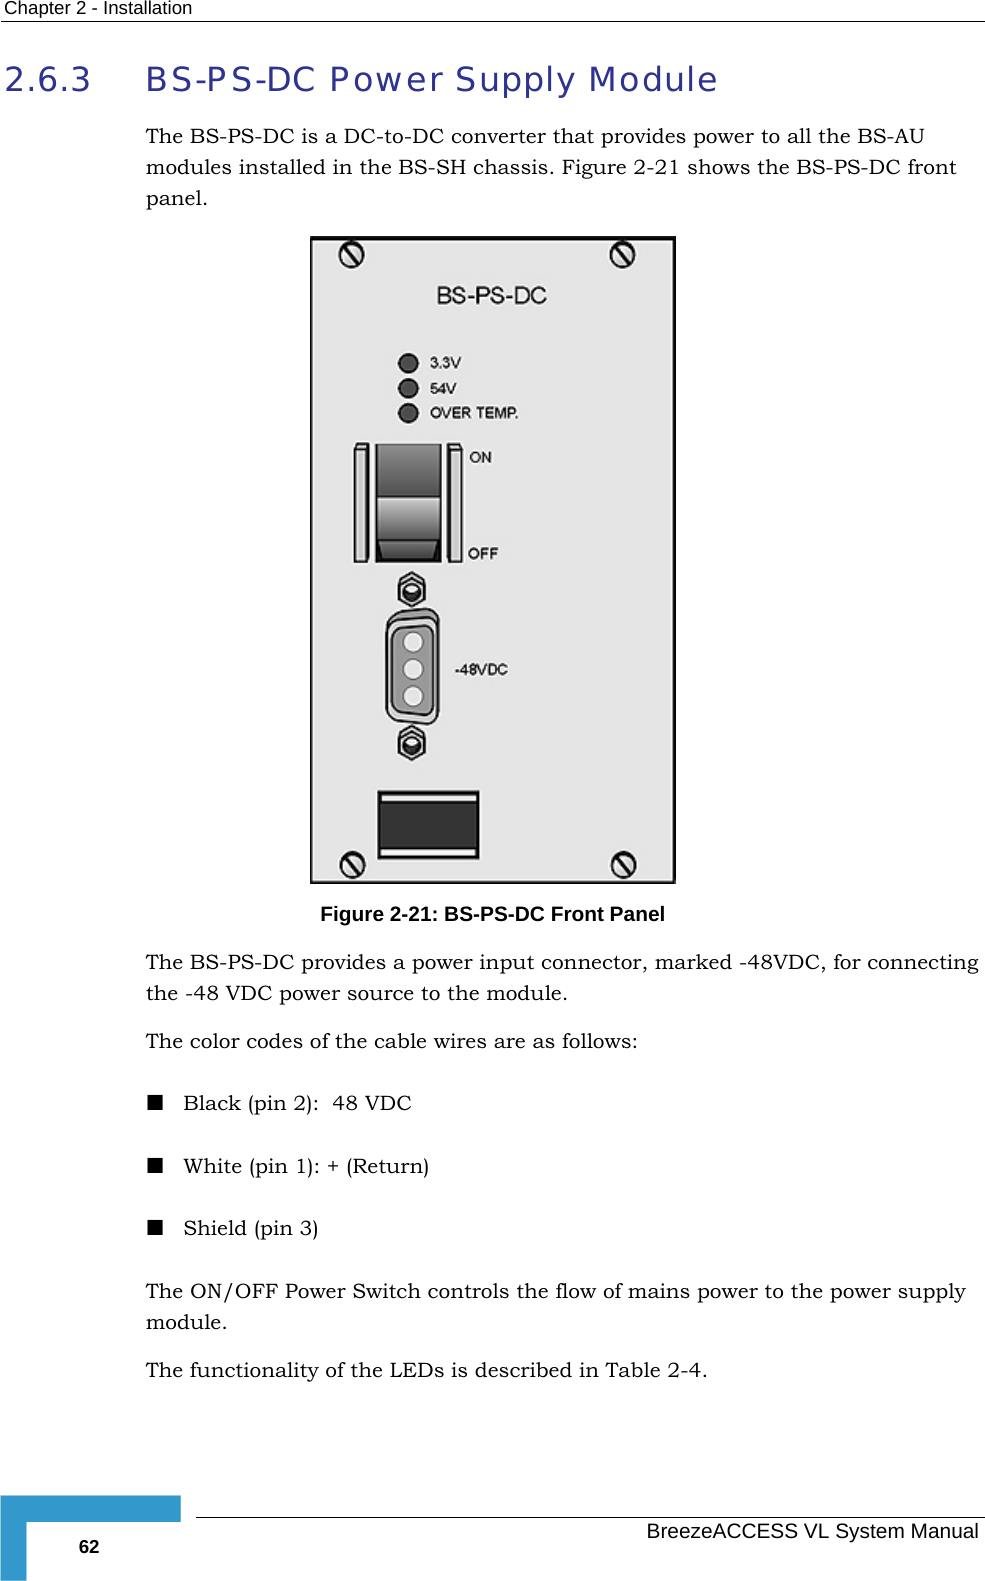 Chapter  2 - Installation   BreezeACCESS VL System Manual 62 2.6.3 BS-PS-DC Power Supply Module The BS-PS-DC is a DC-to-DC converter that provides power to all the BS-AU modules installed in the BS-SH chassis. Figure  2-21 shows the BS-PS-DC front panel.  Figure  2-21: BS-PS-DC Front Panel The BS-PS-DC provides a power input connector, marked -48VDC, for connecting the -48 VDC power source to the module.  The color codes of the cable wires are as follows:  Black (pin 2):  48 VDC  White (pin 1): + (Return)  Shield (pin 3) The ON/OFF Power Switch controls the flow of mains power to the power supply module. The functionality of the LEDs is described in Table  2-4. 